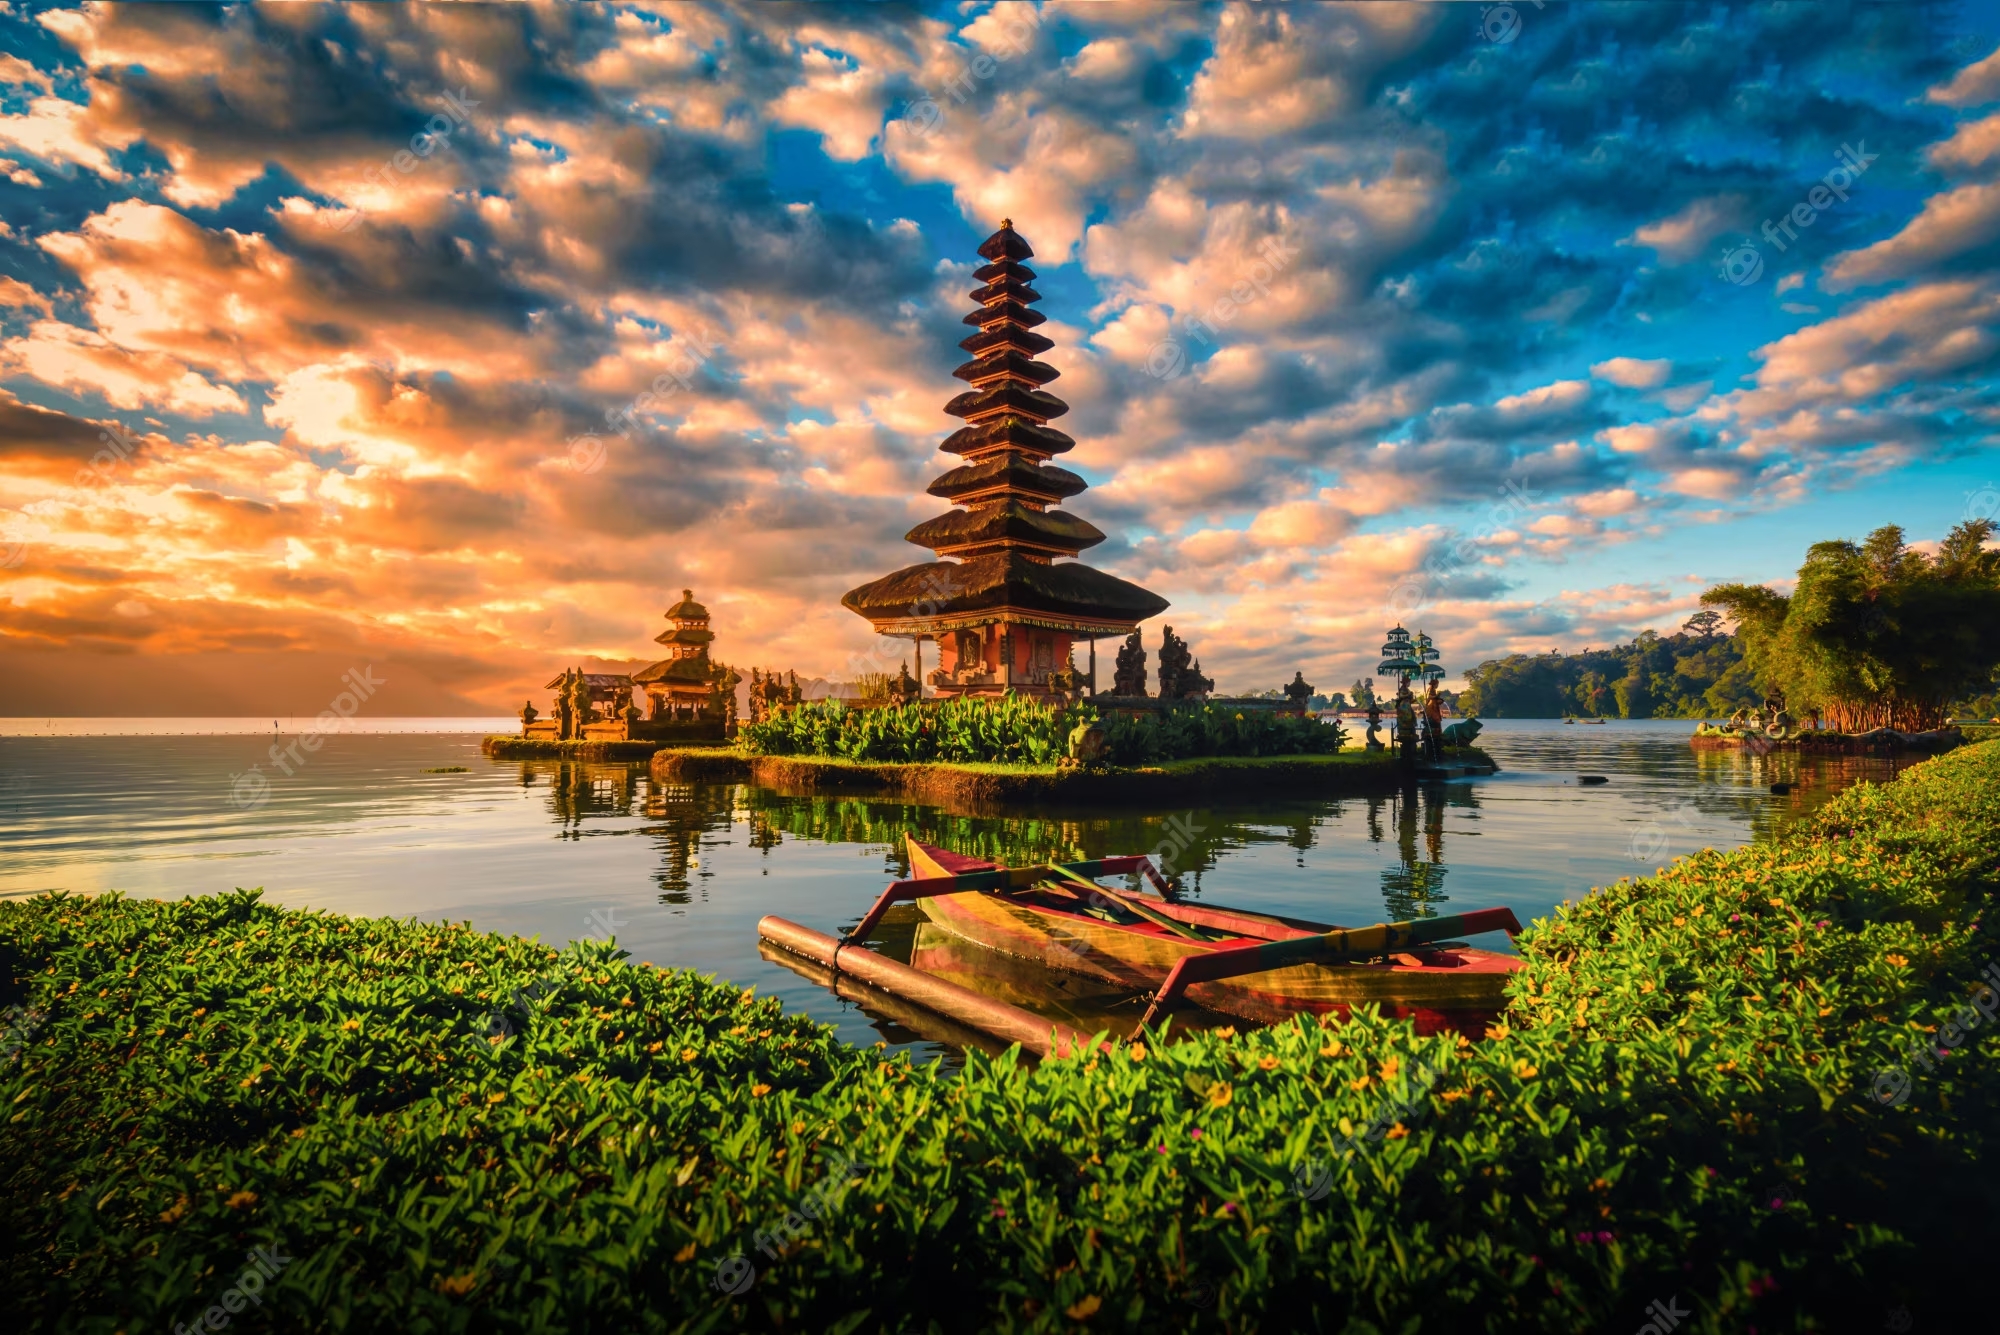 Heart-taking Places You Should Visit in Bali post thumbnail image